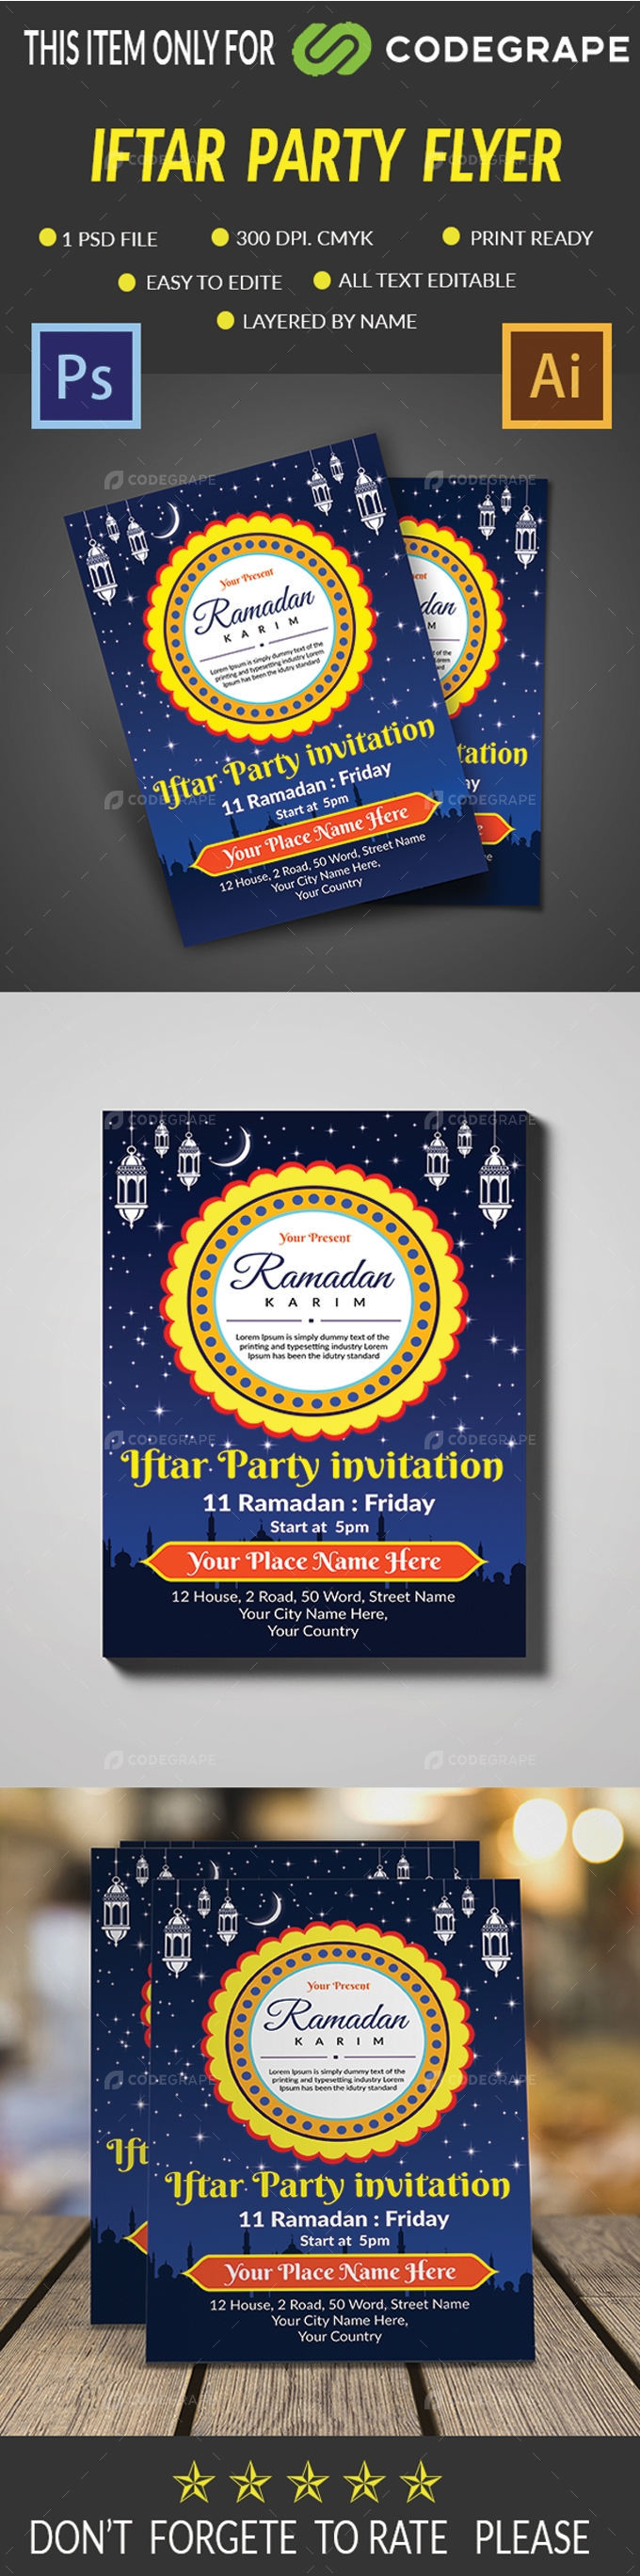 Iftar Party Flyer